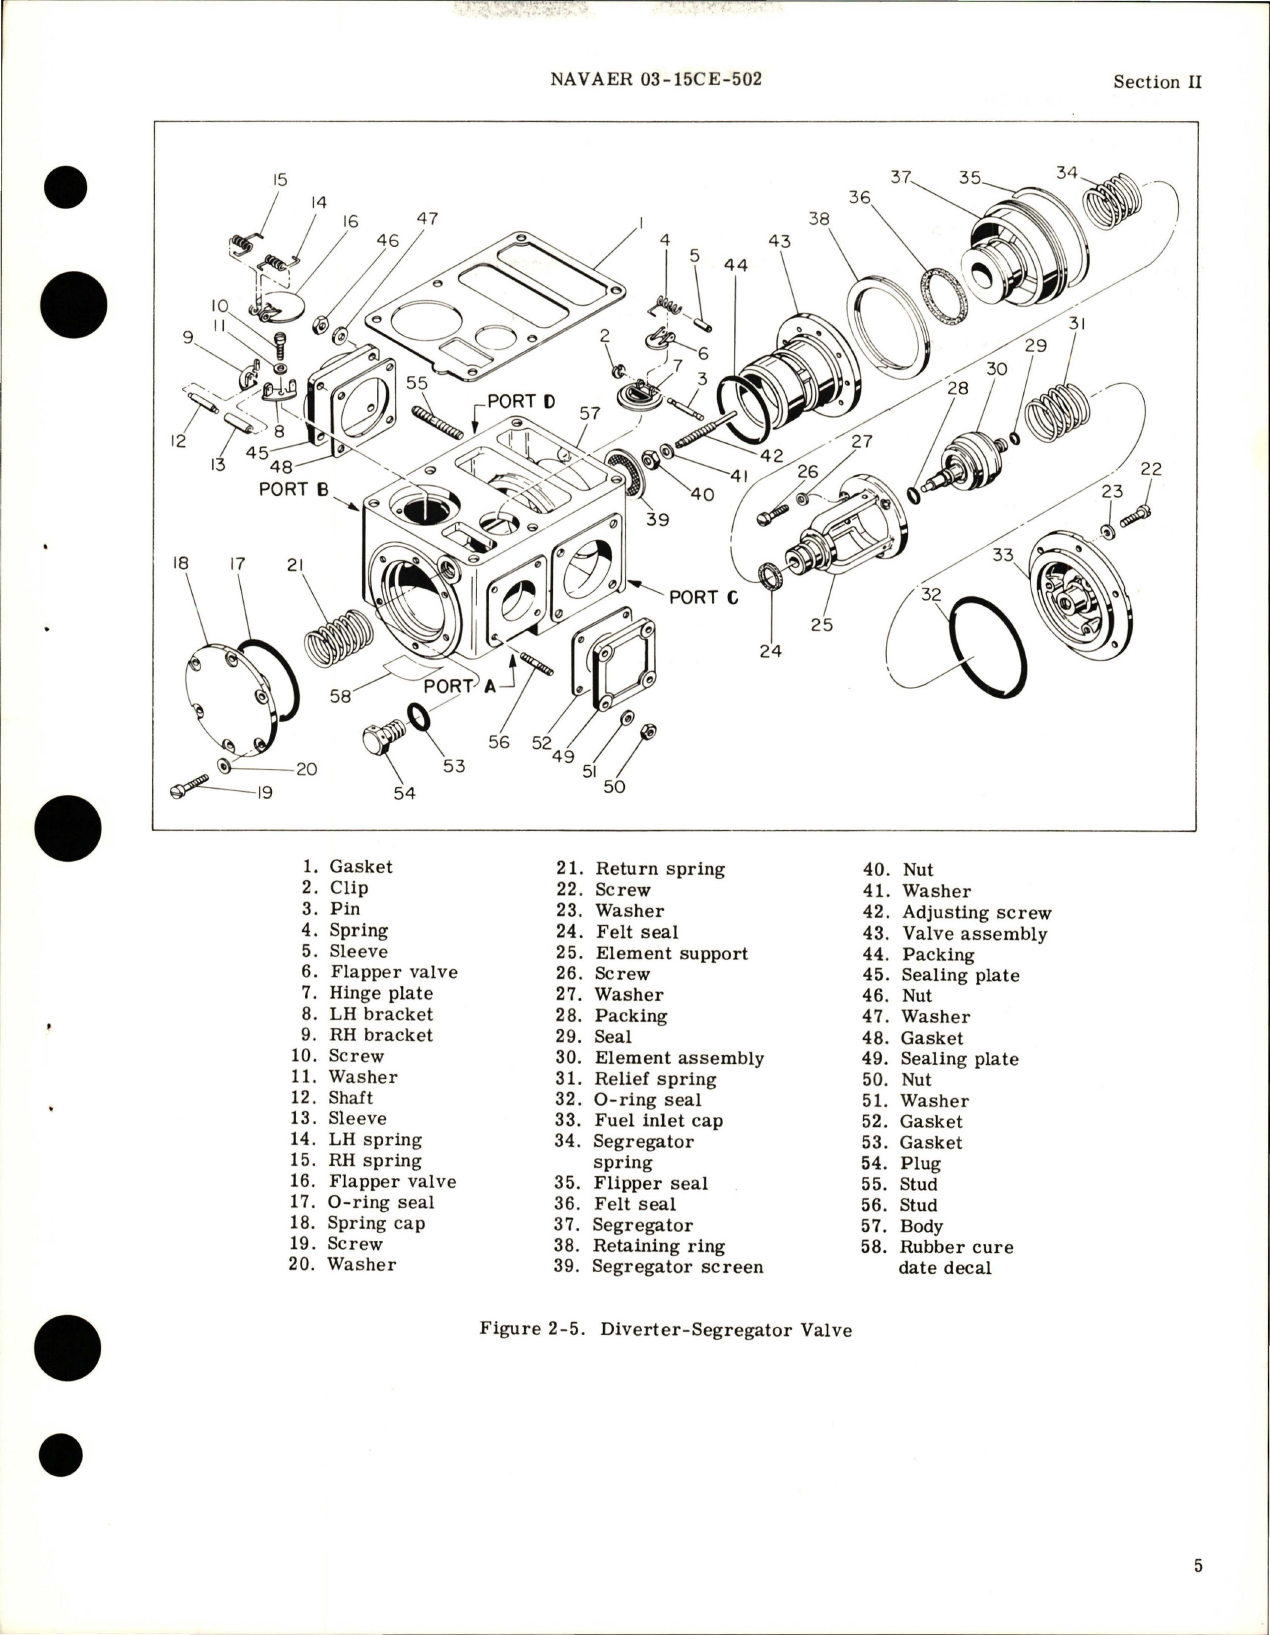 Sample page 9 from AirCorps Library document: Overhaul Instructions for Diverter-Segregator Valve Assemblies